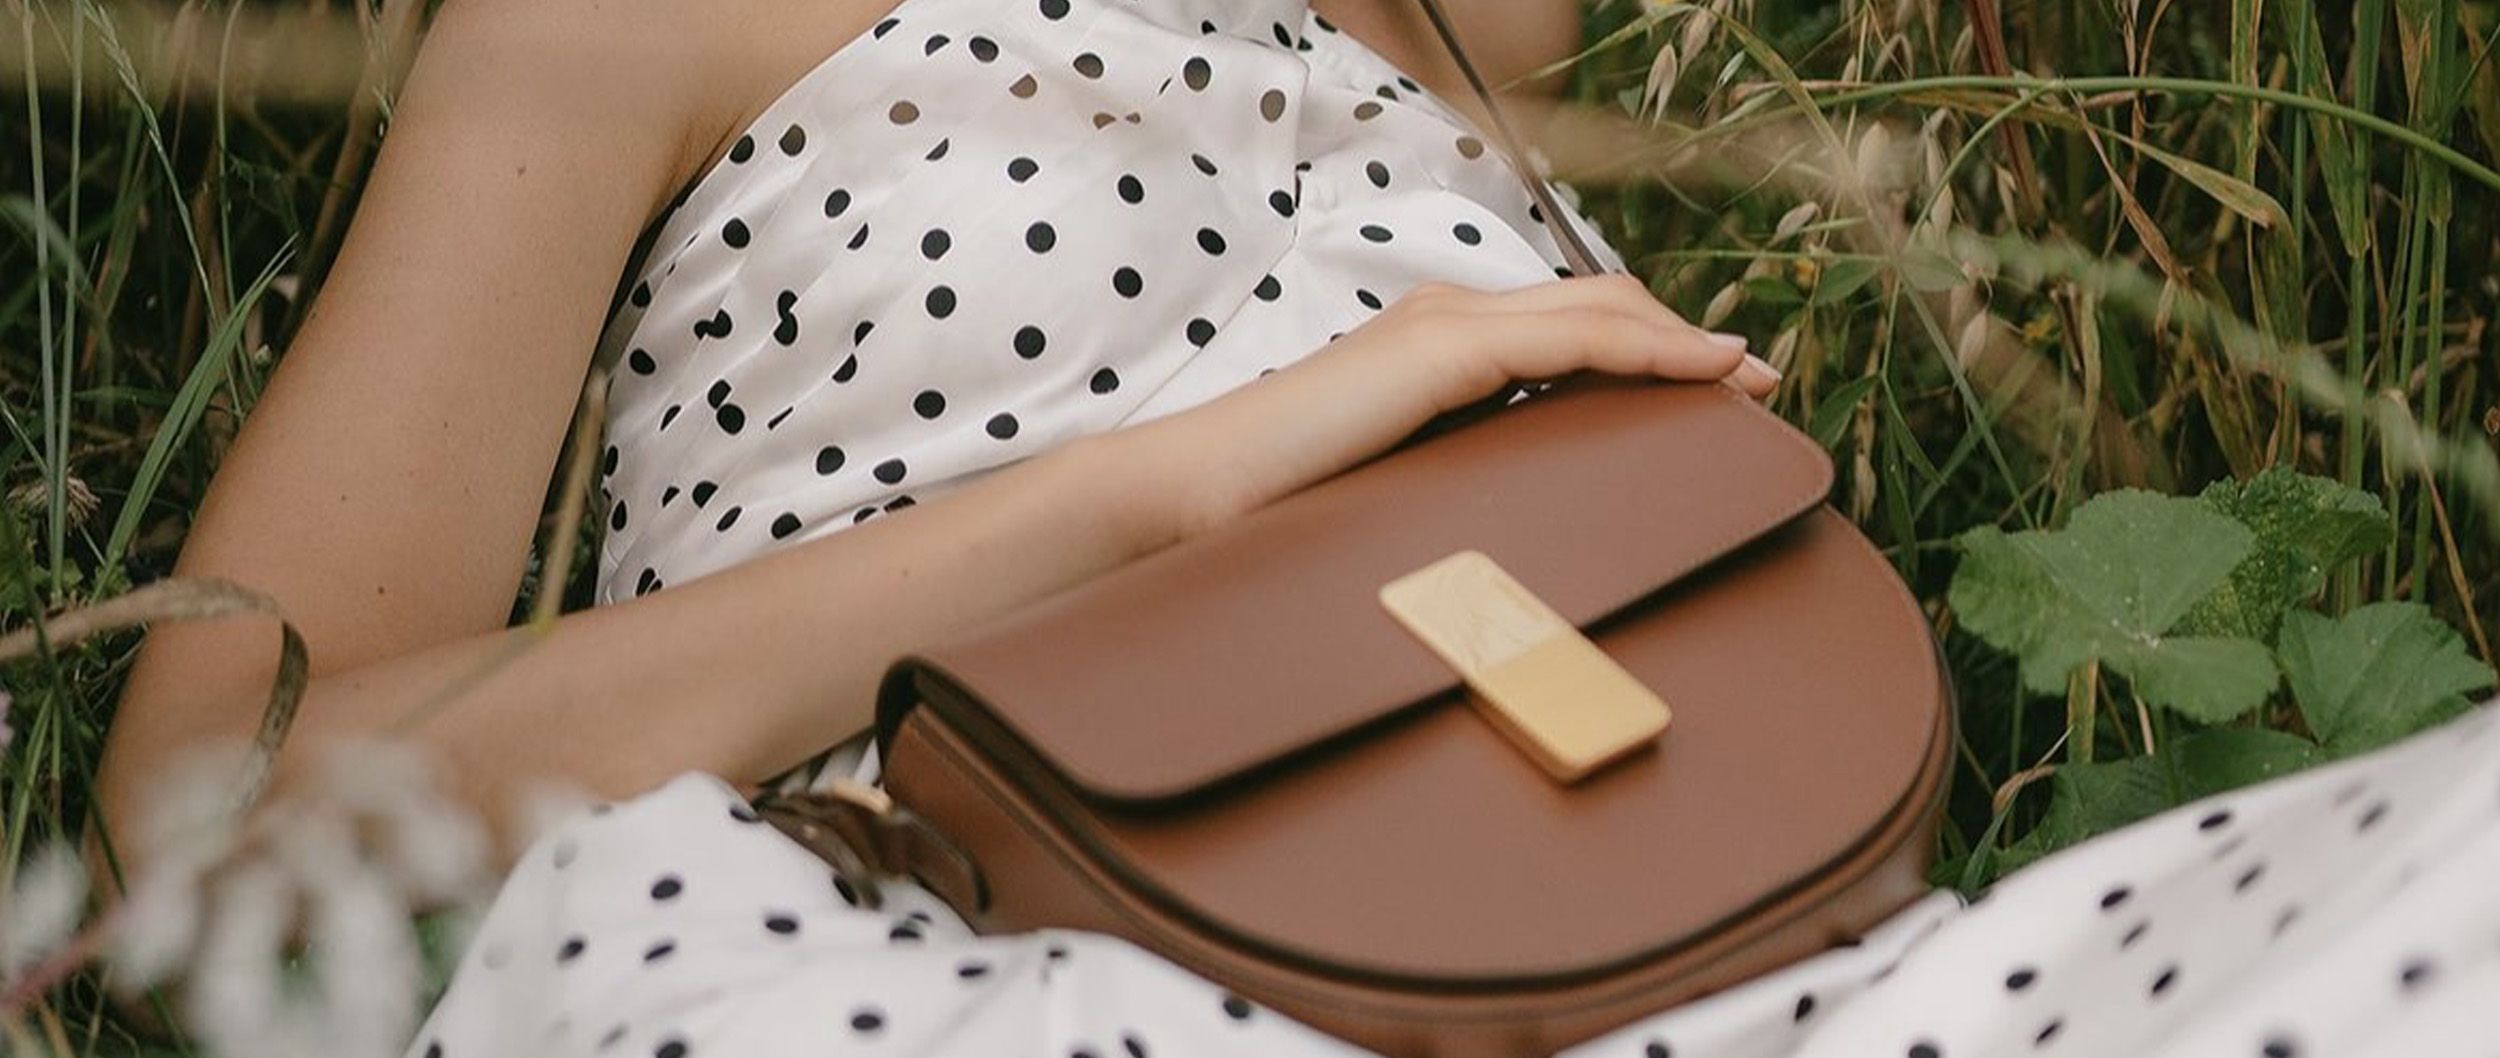 5 brands of eco-friendly handbags for women, L'Exception